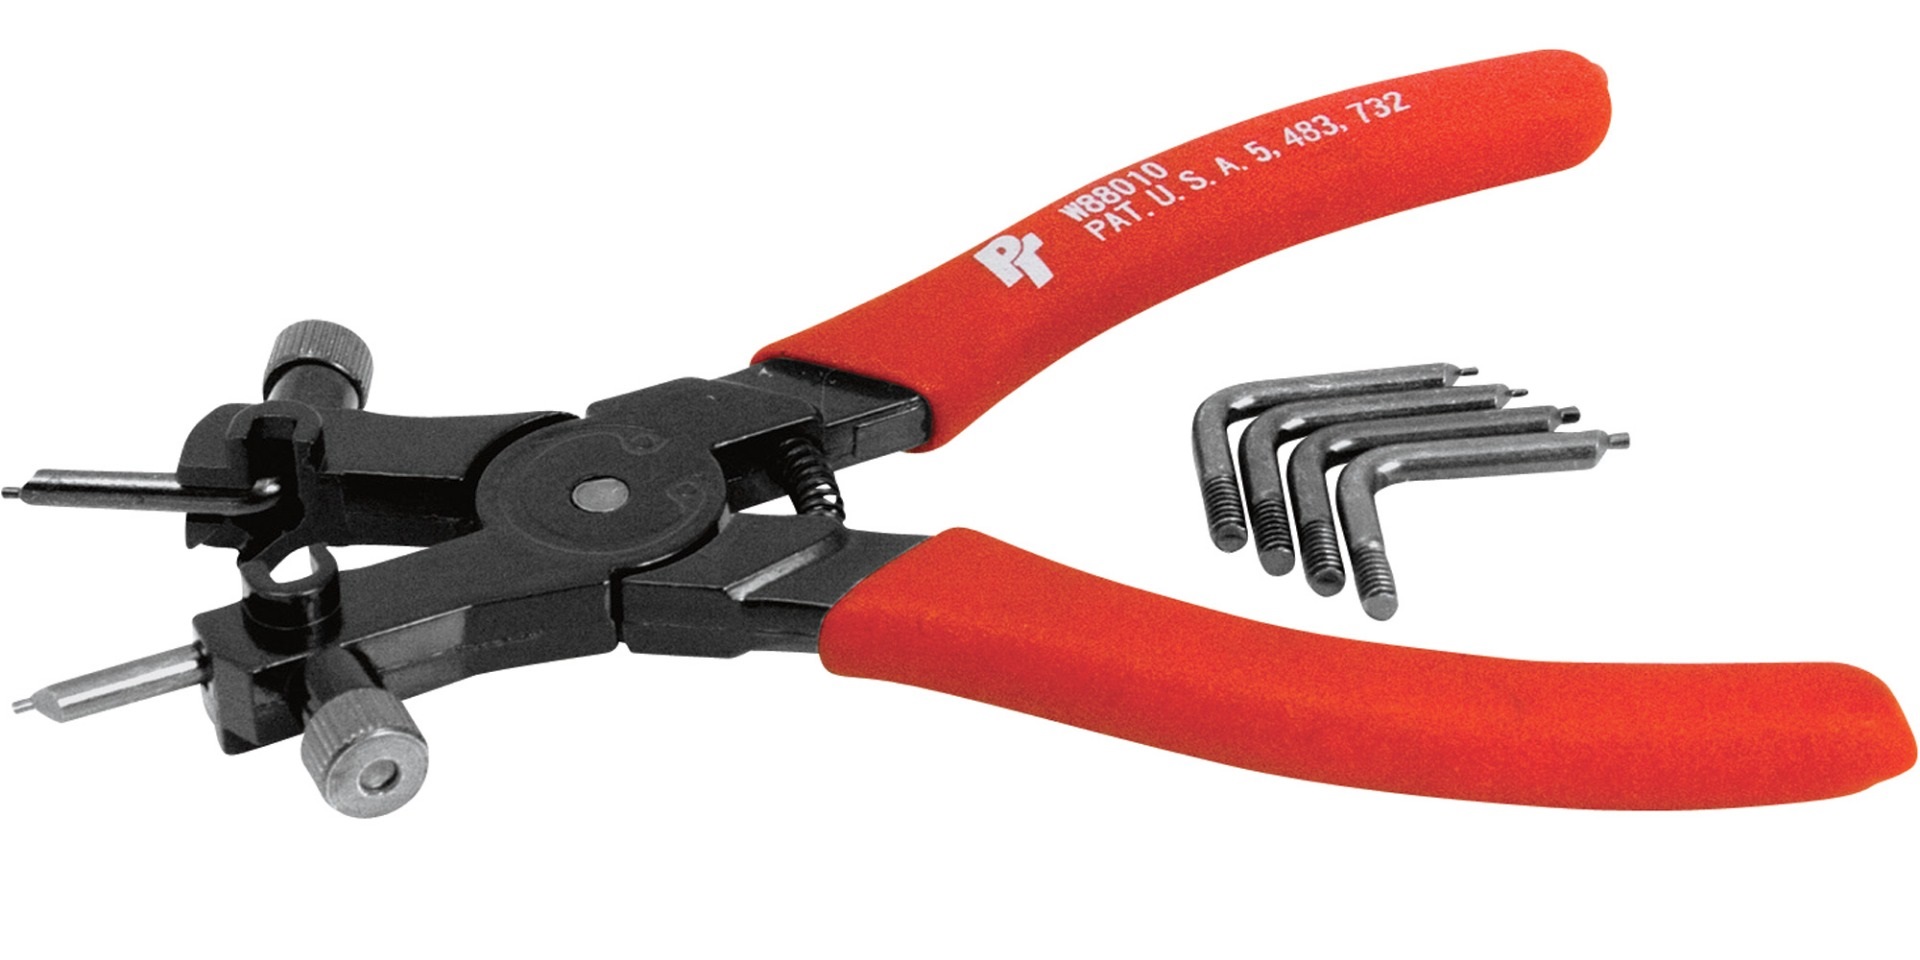 An example of ring pliers